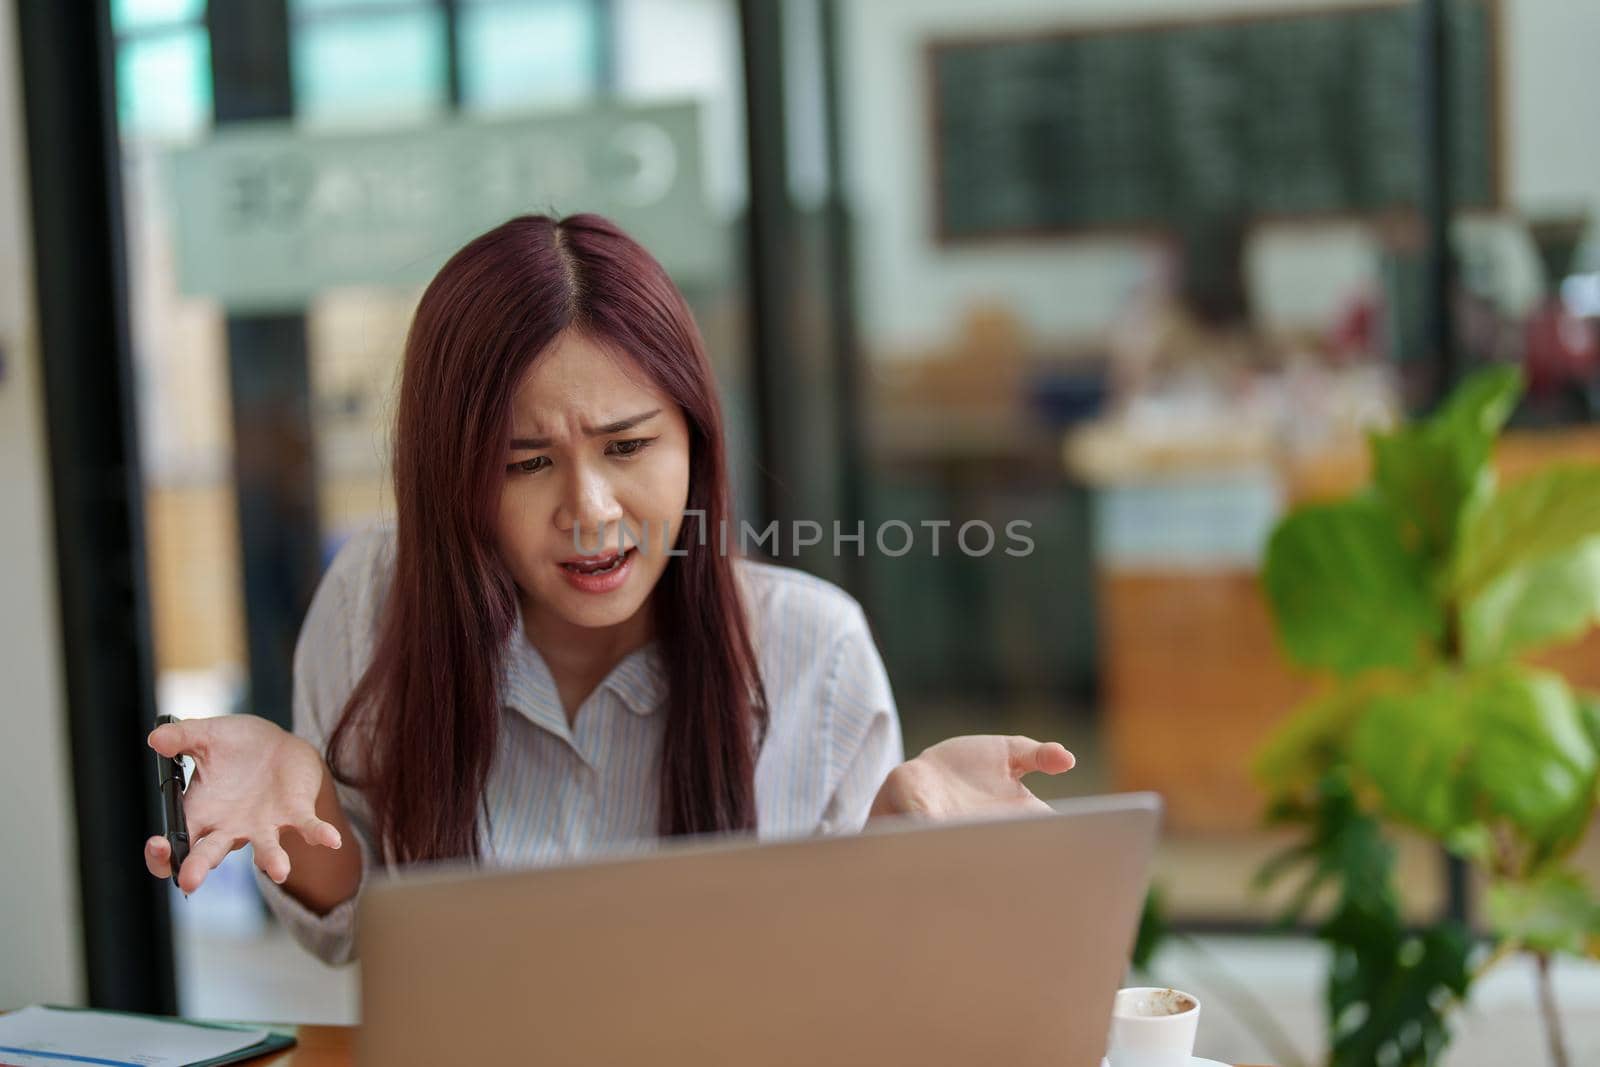 Portrait of an Asian female employee using a computer to confer with a business partner with a serious expression on solution negotiations, marketing planning and budget management.